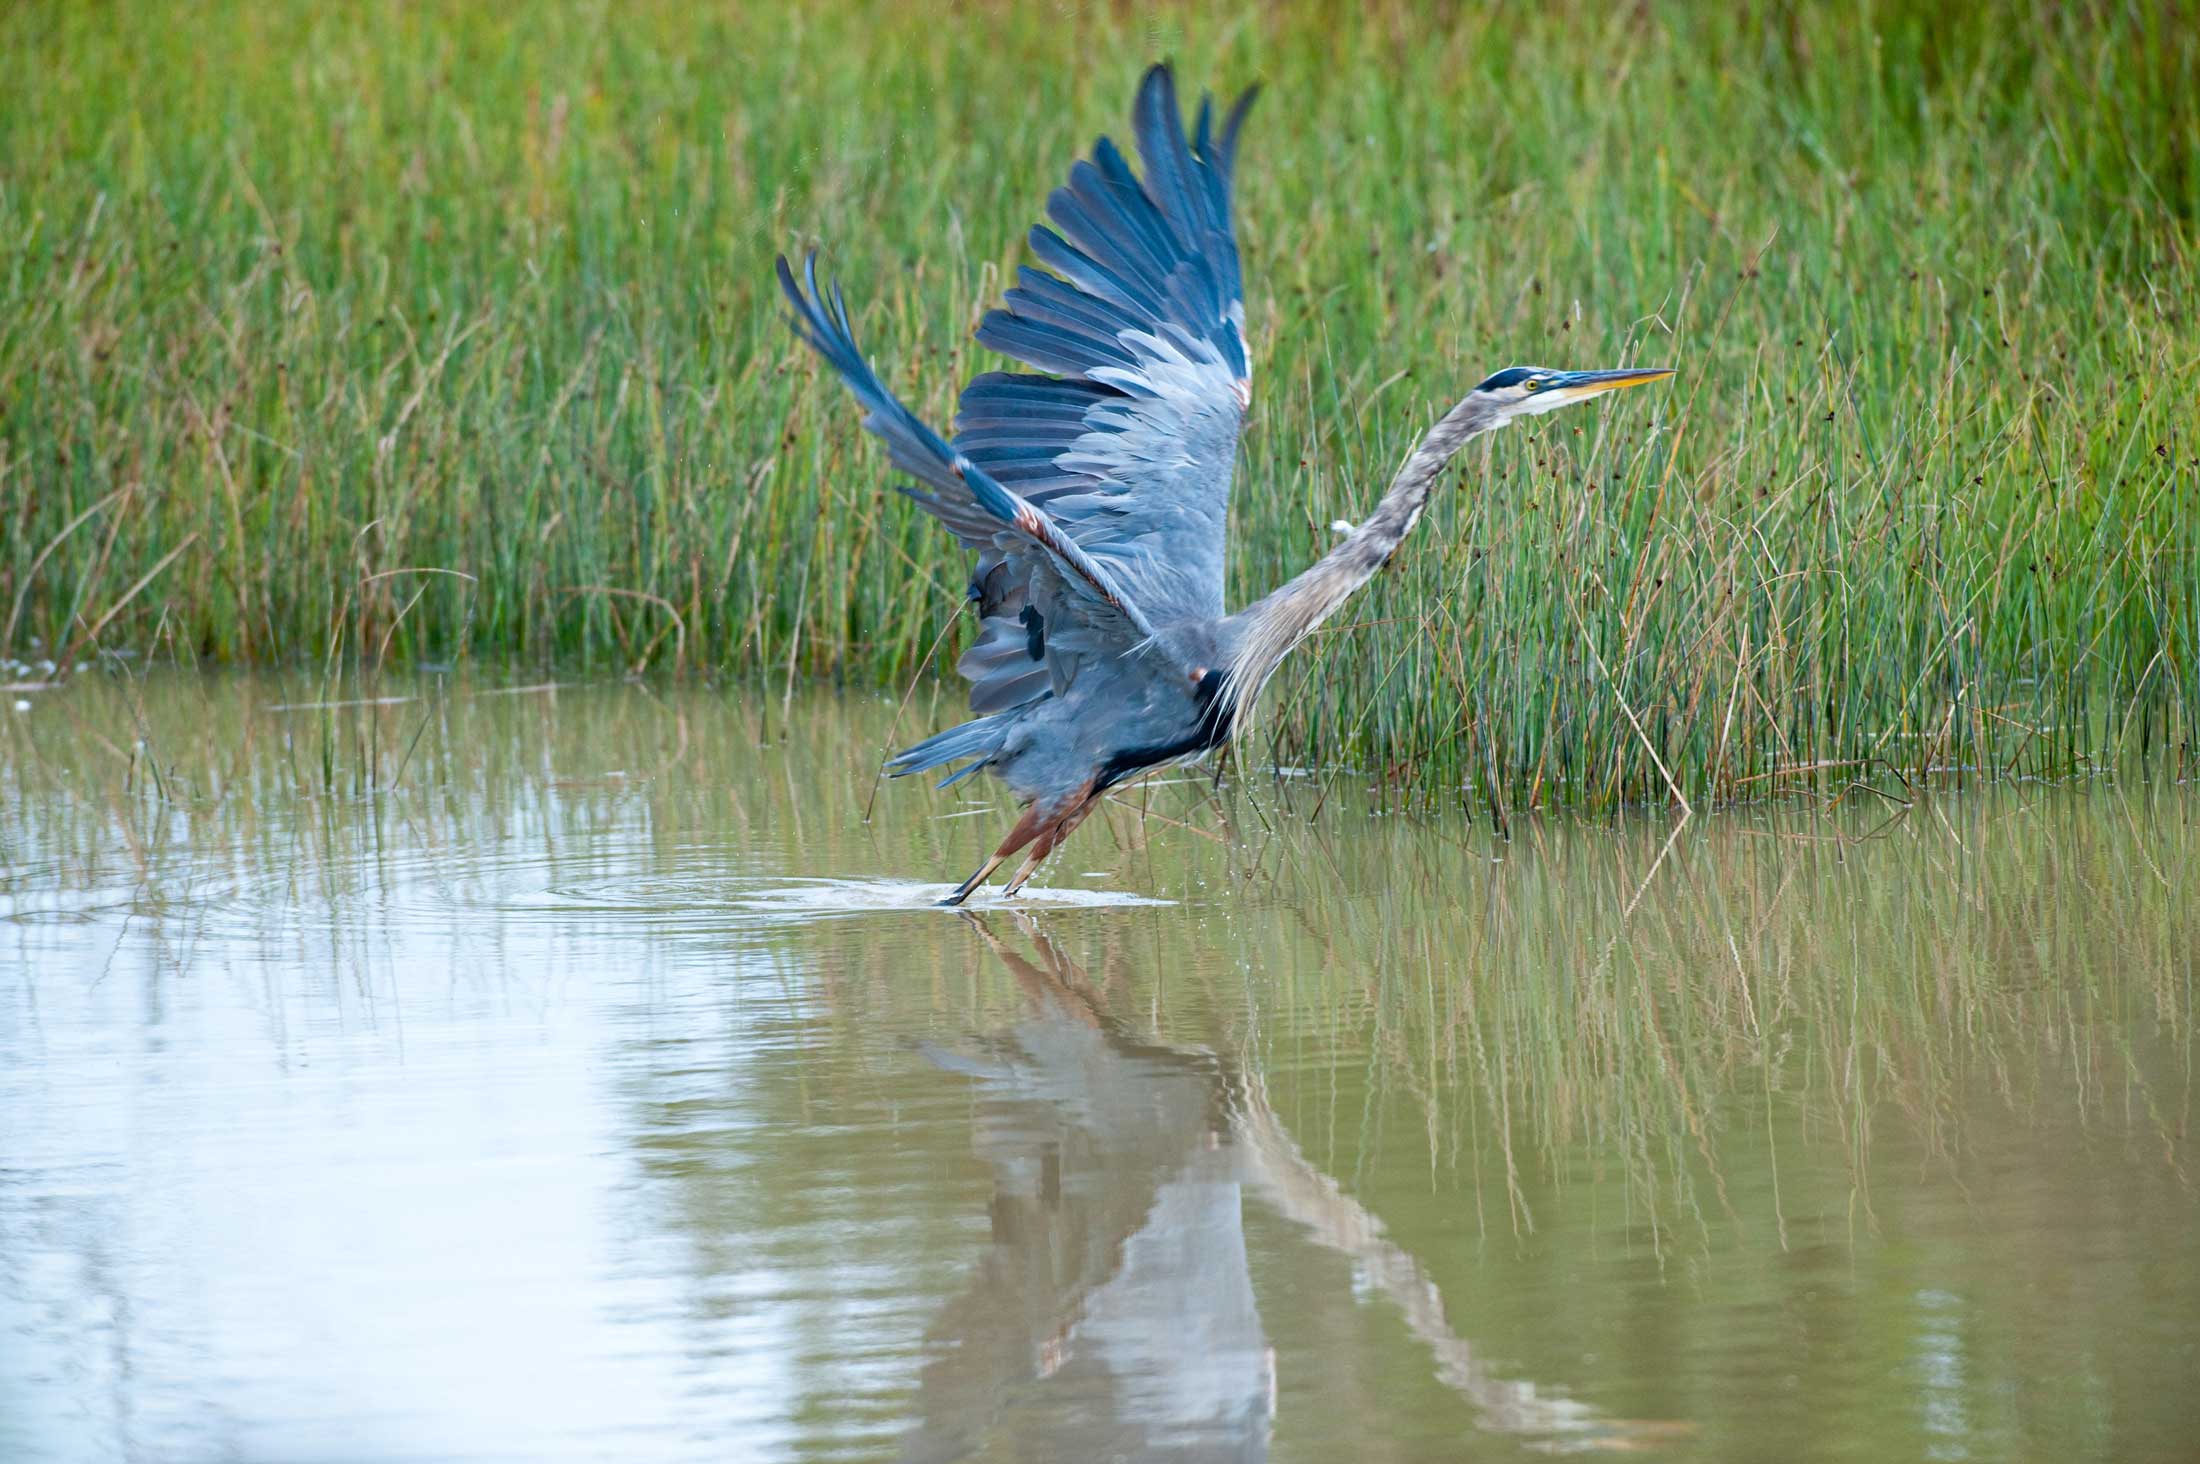 A blue heron starts to fly over a marsh